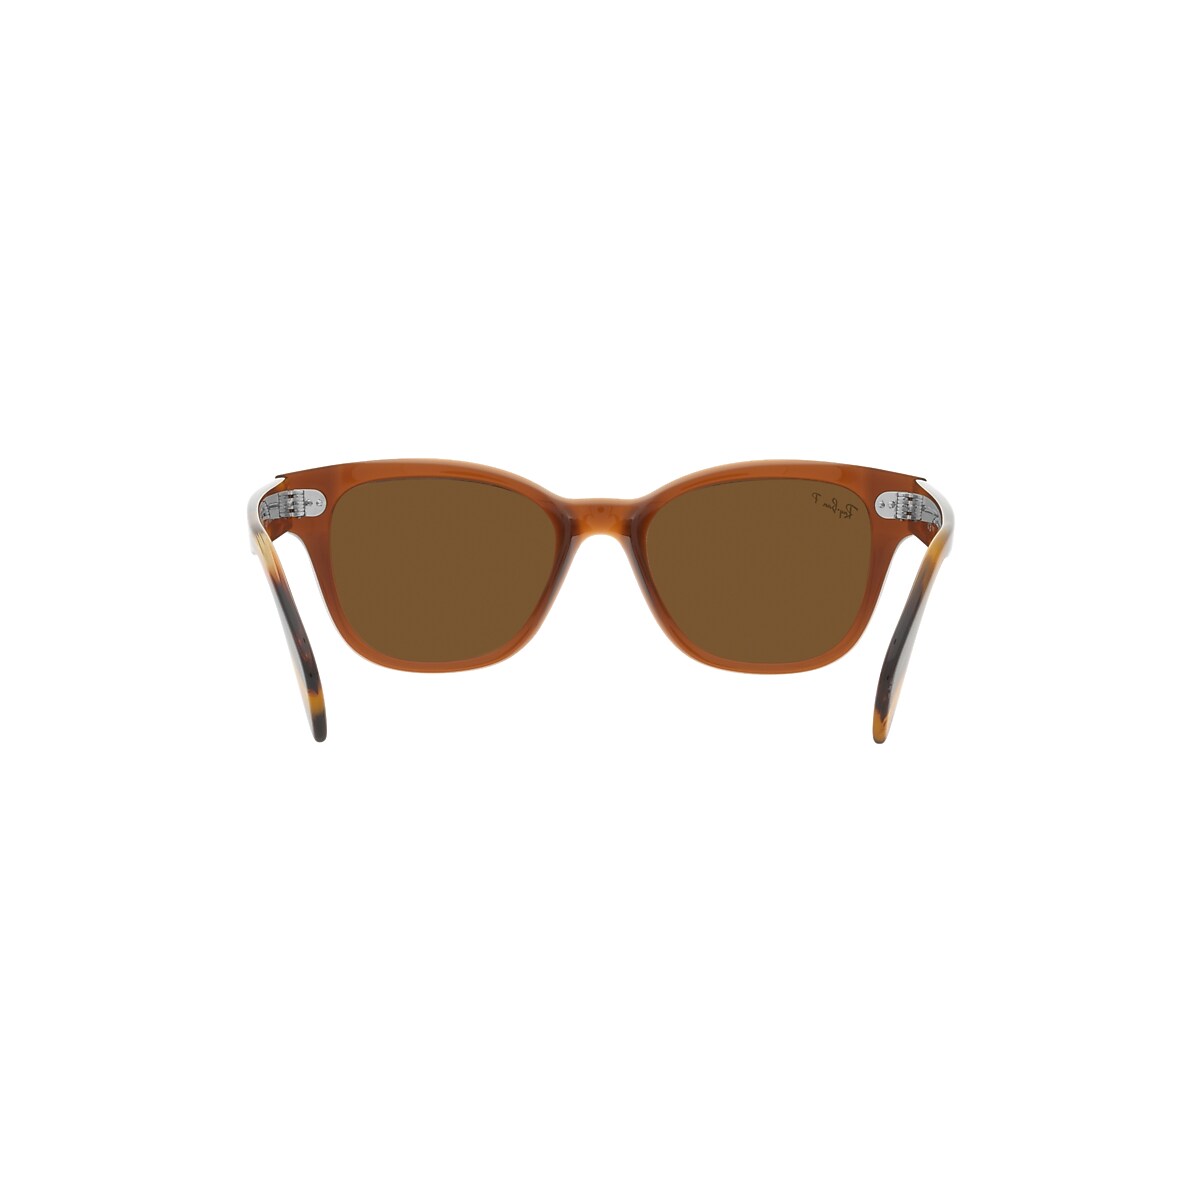 RB0880S Sunglasses in Transparent Brown and Brown - RB0880SF